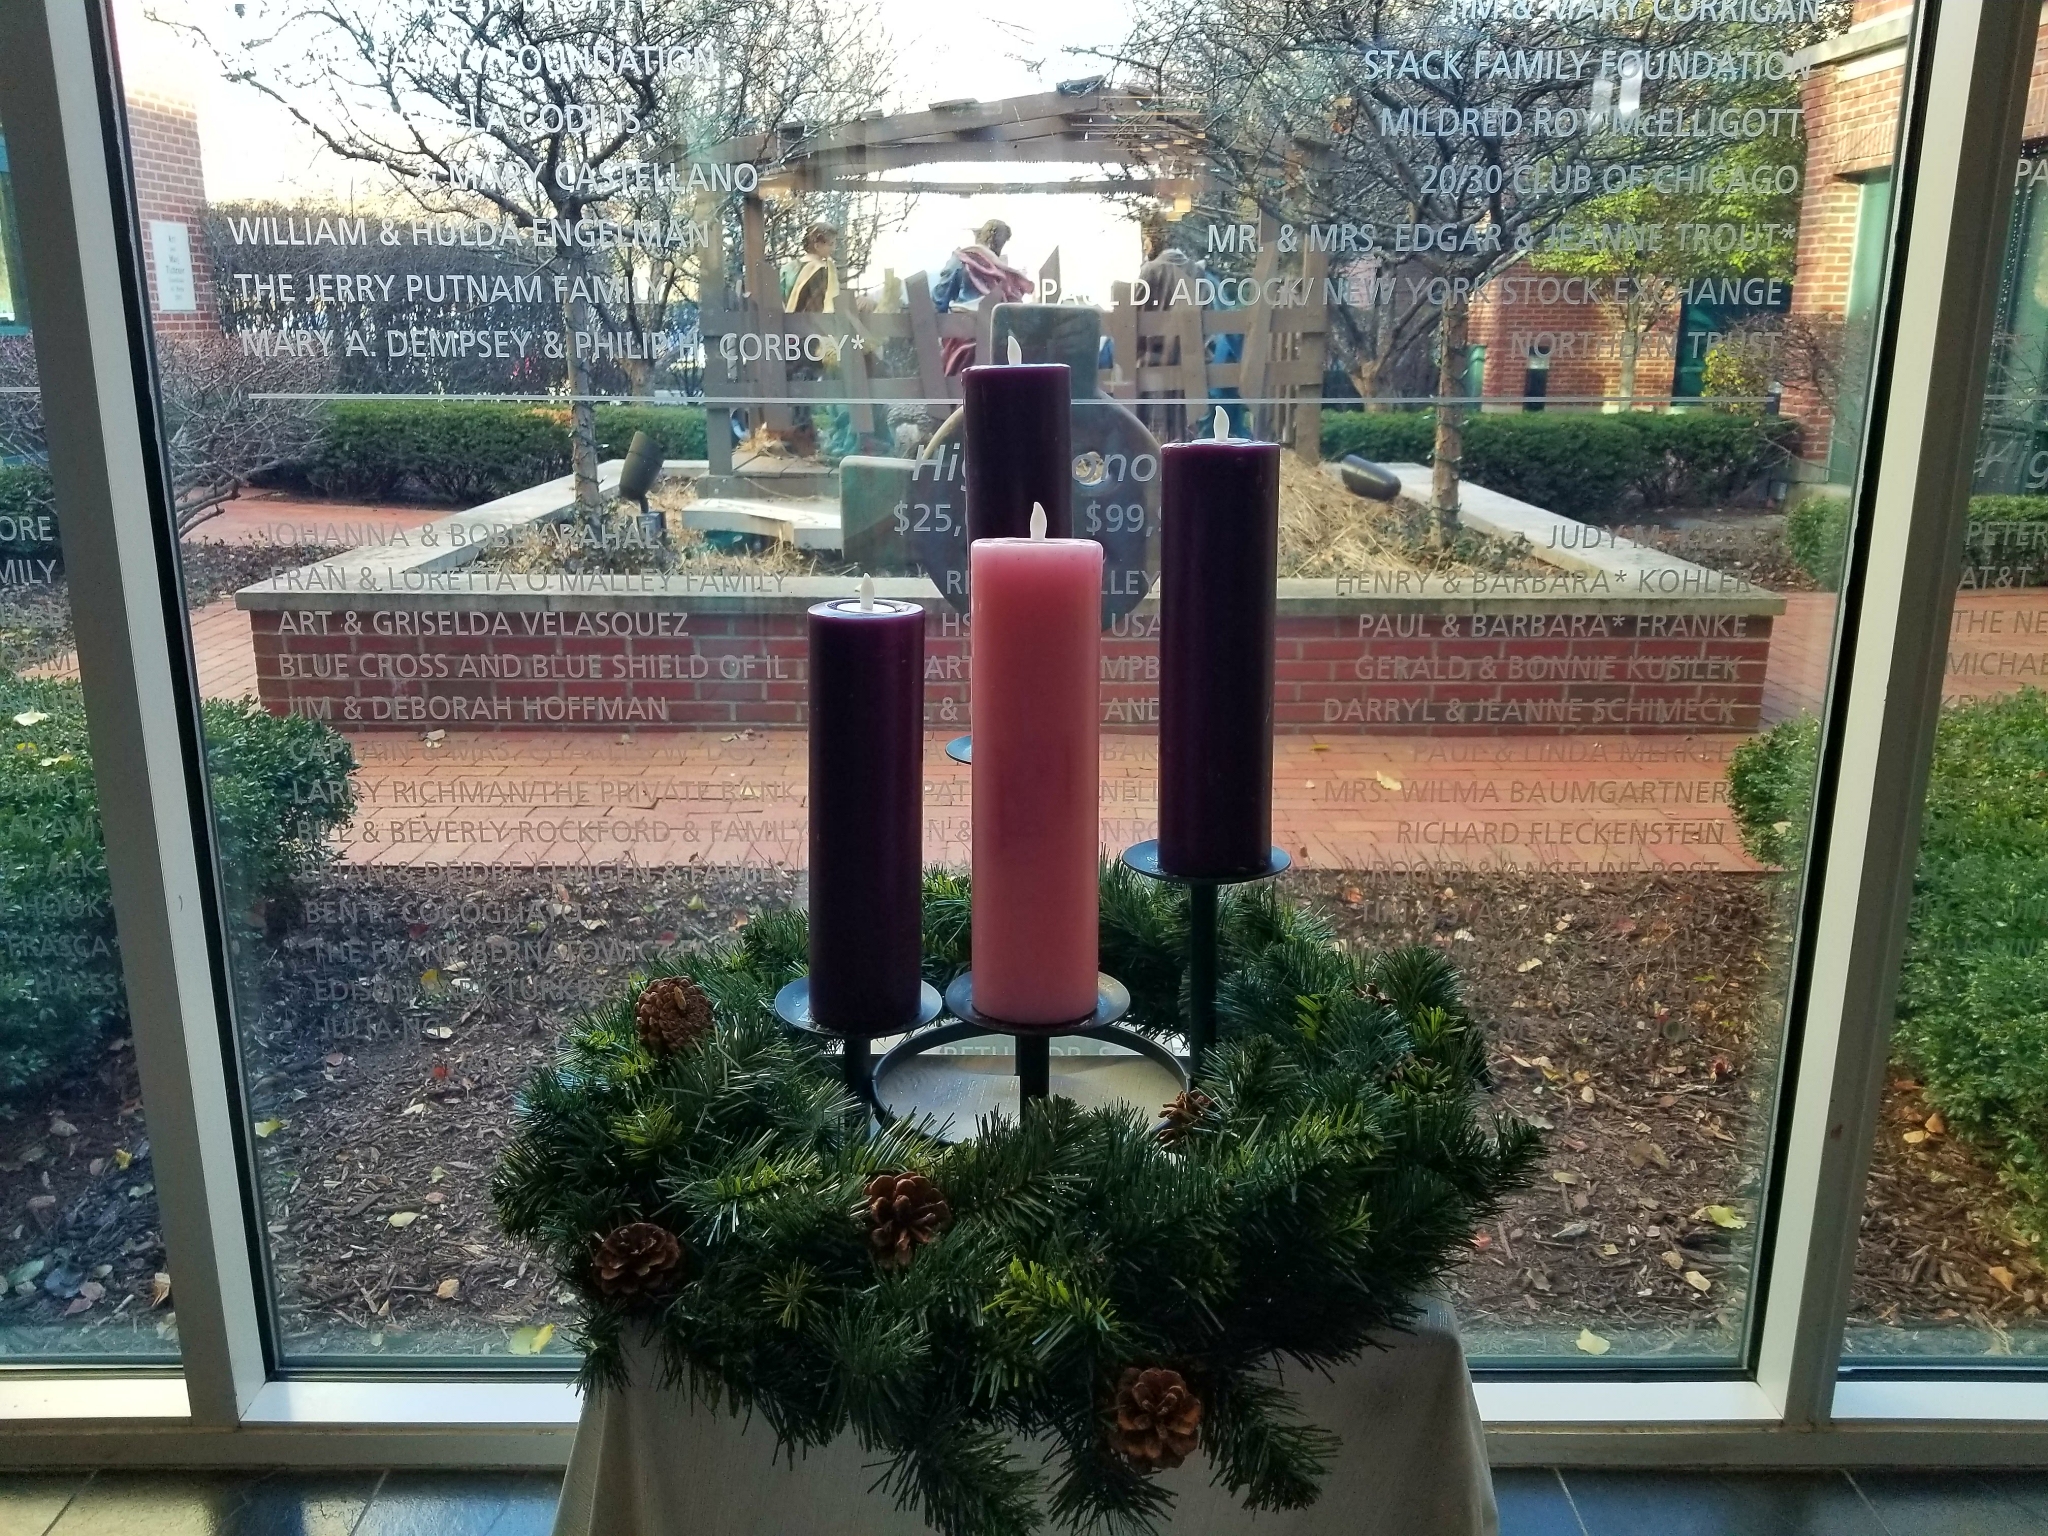 advent wreath candles